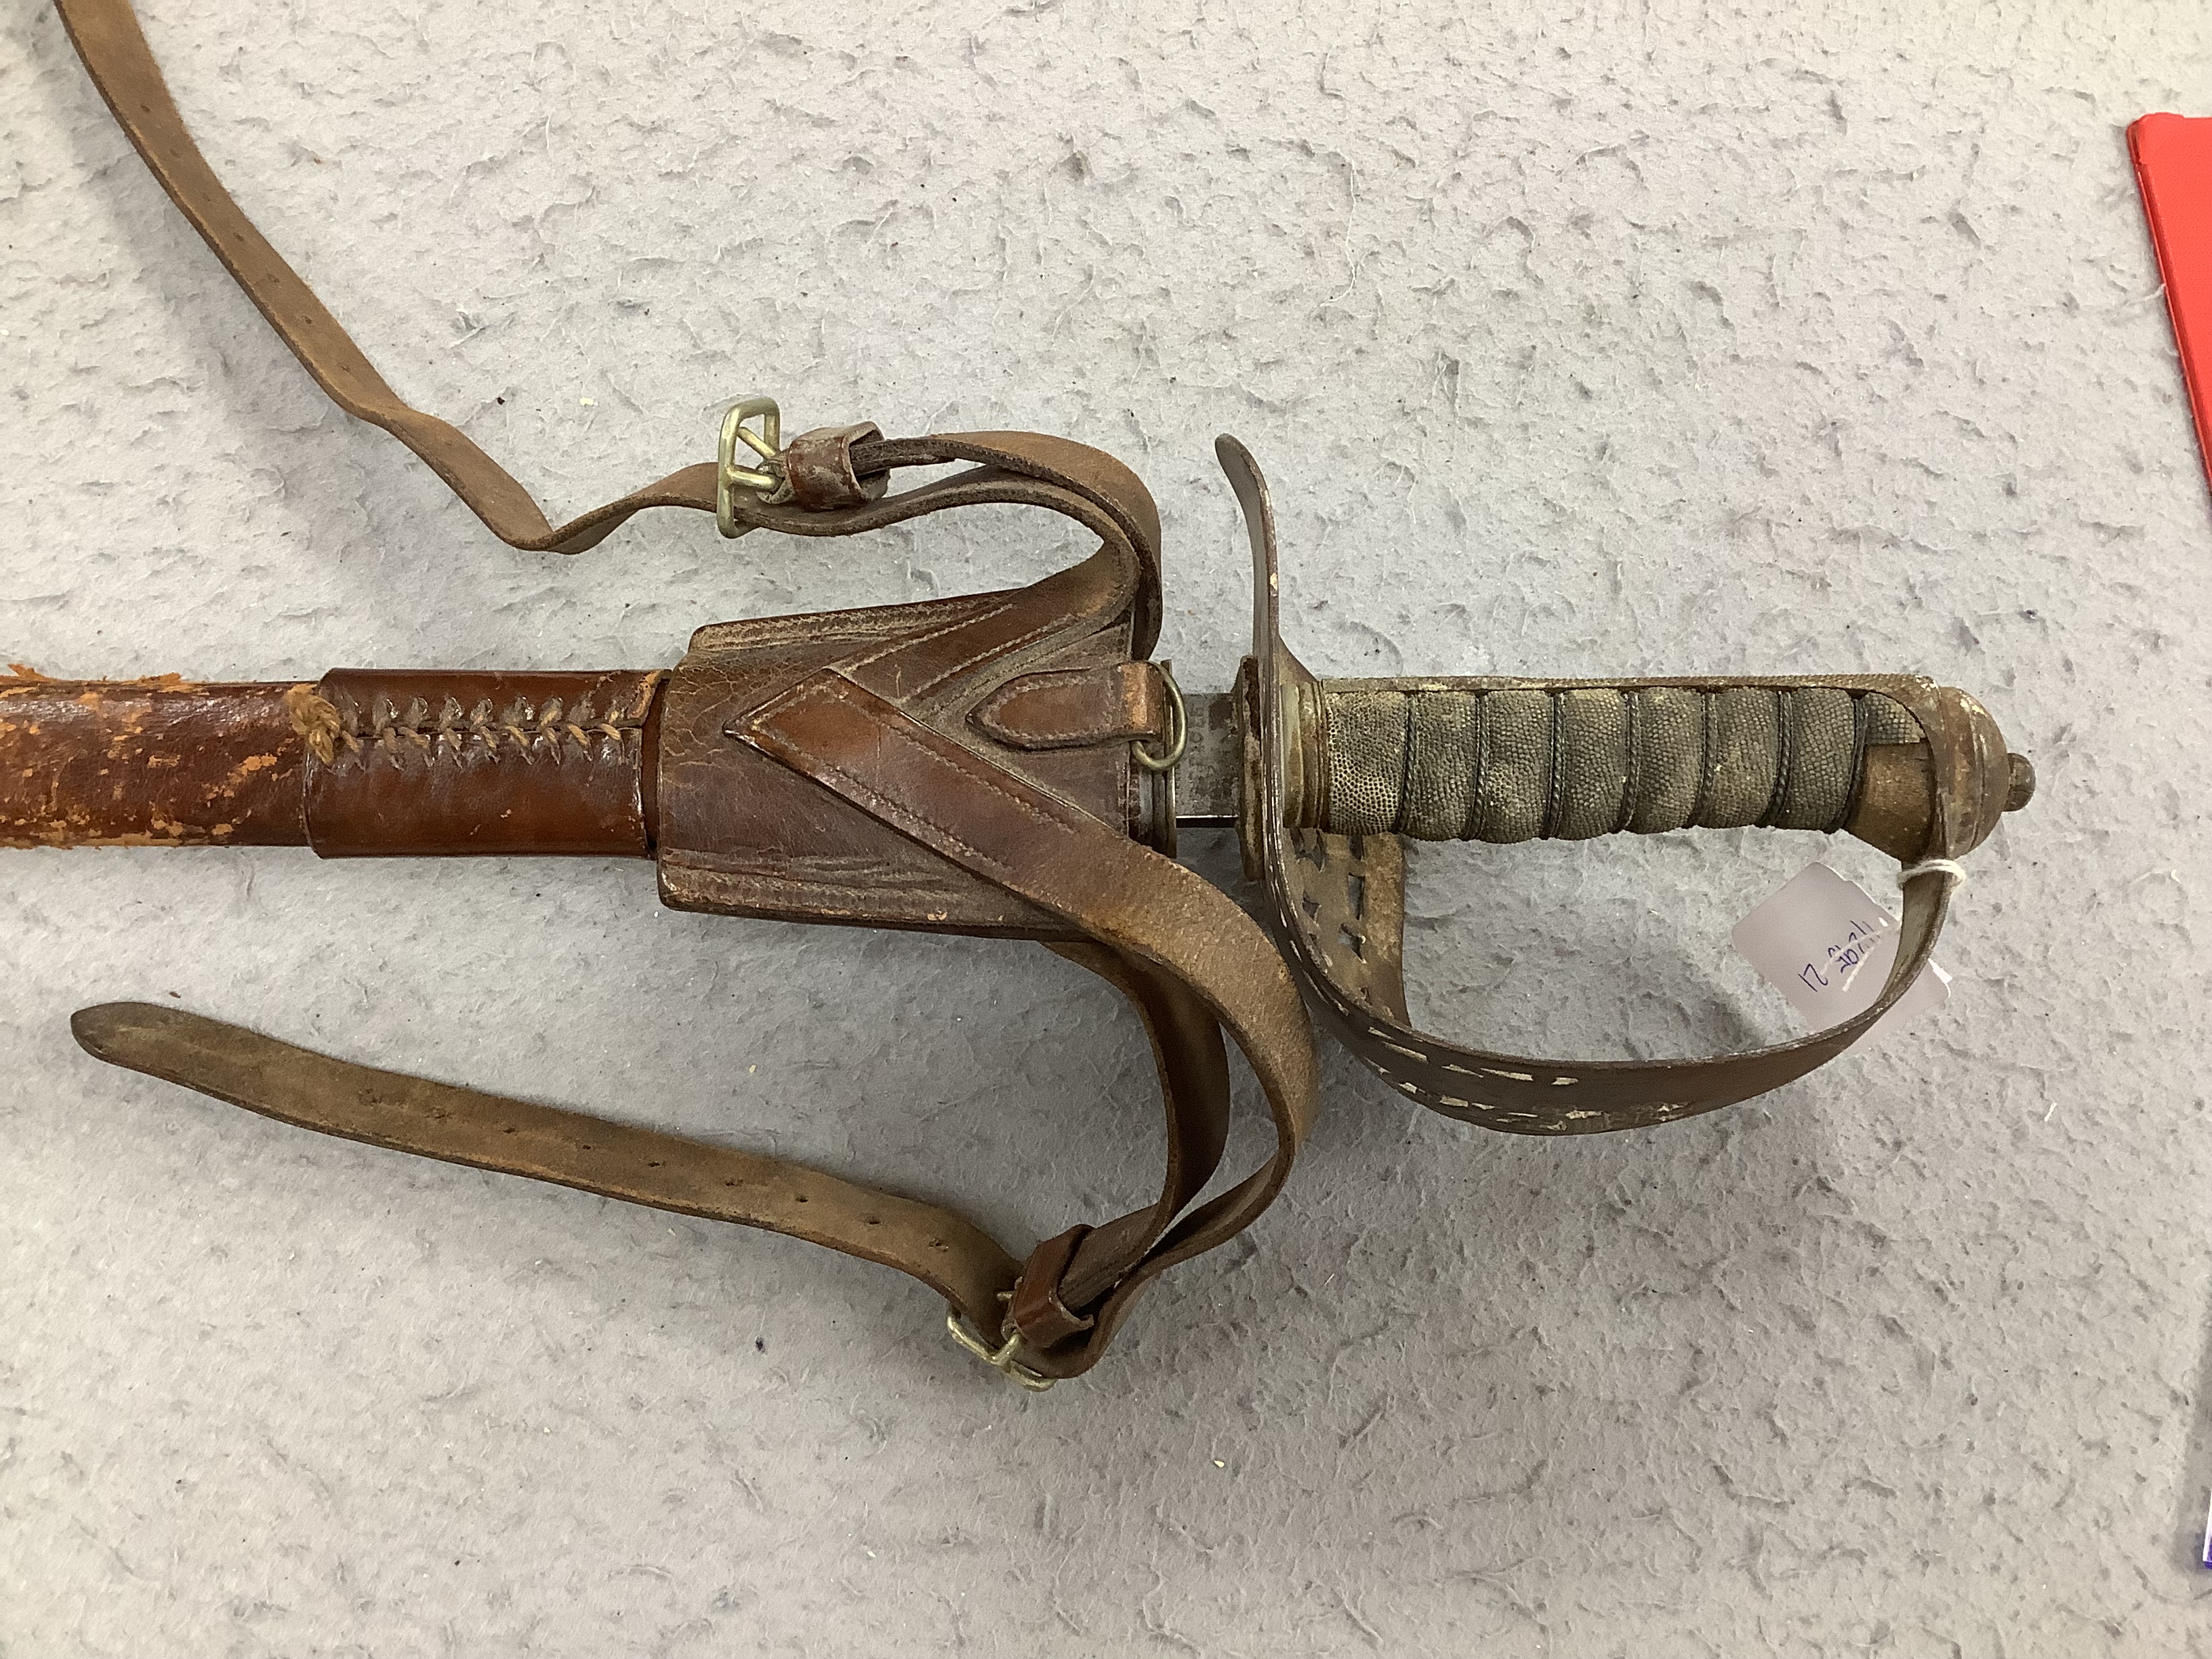 A Victorian 1897 pattern infantry officer's sword, maker Robert Mole & Sons, Birmingham, marked War and India offices, with scabbard and leather hanger, blade 82cm